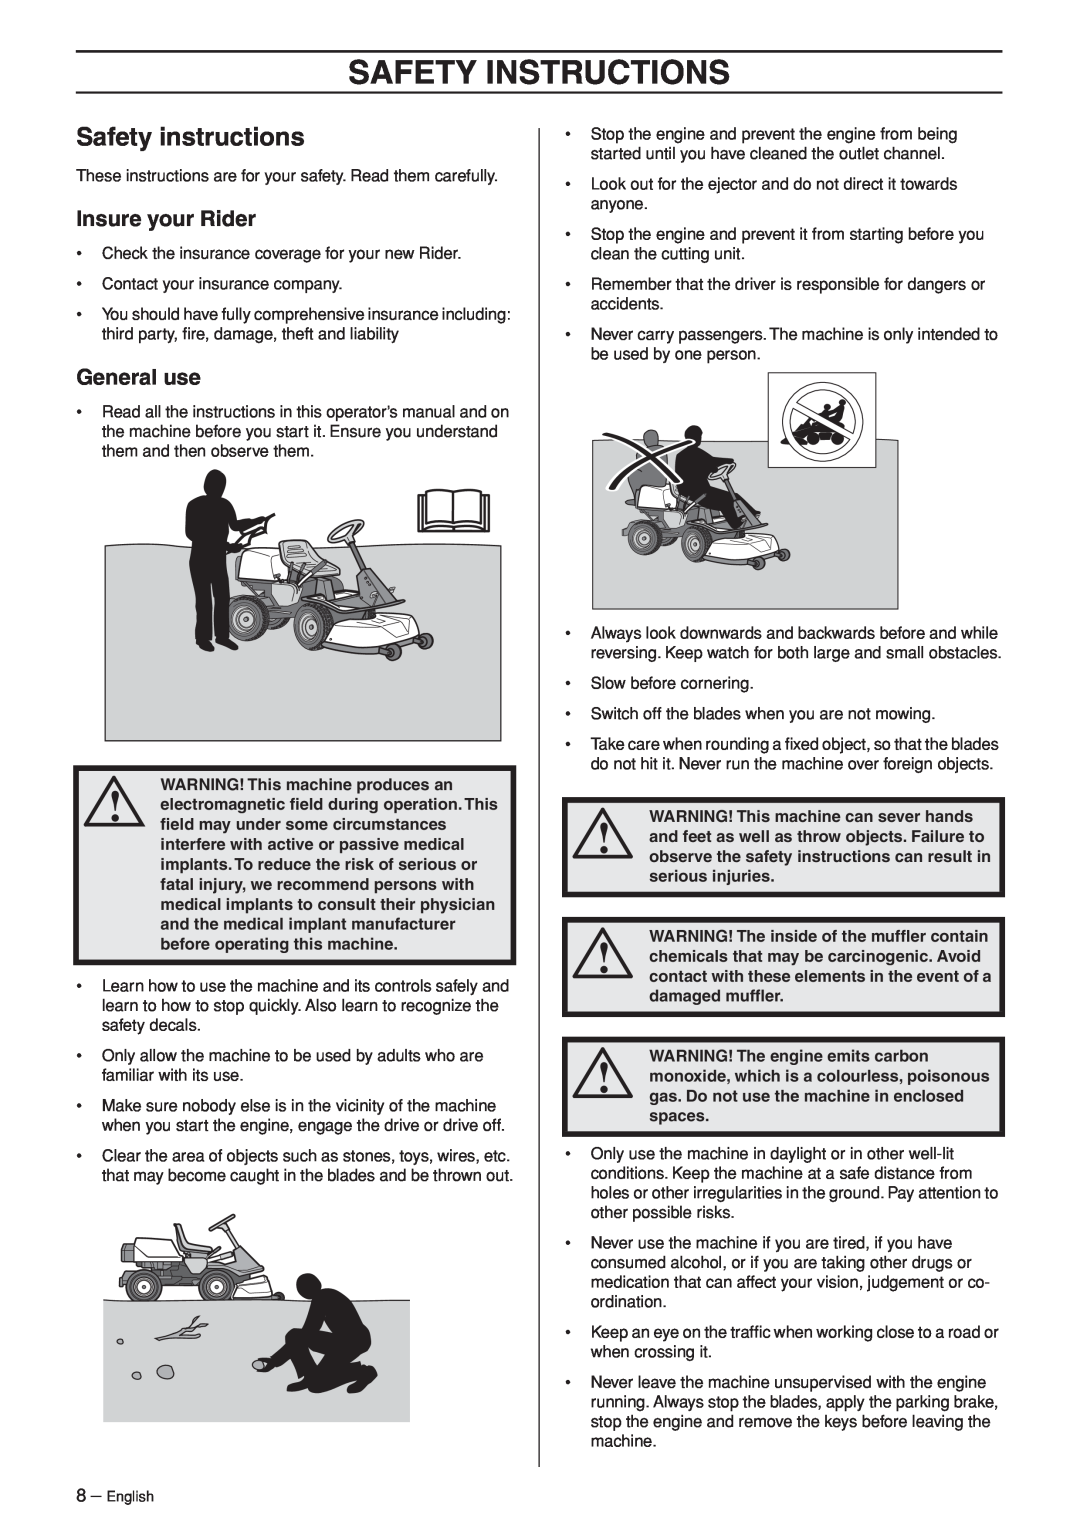 Husqvarna 15Ts AWD Safety Instructions, Safety instructions, Insure your Rider, General use, serious injuries, spaces 